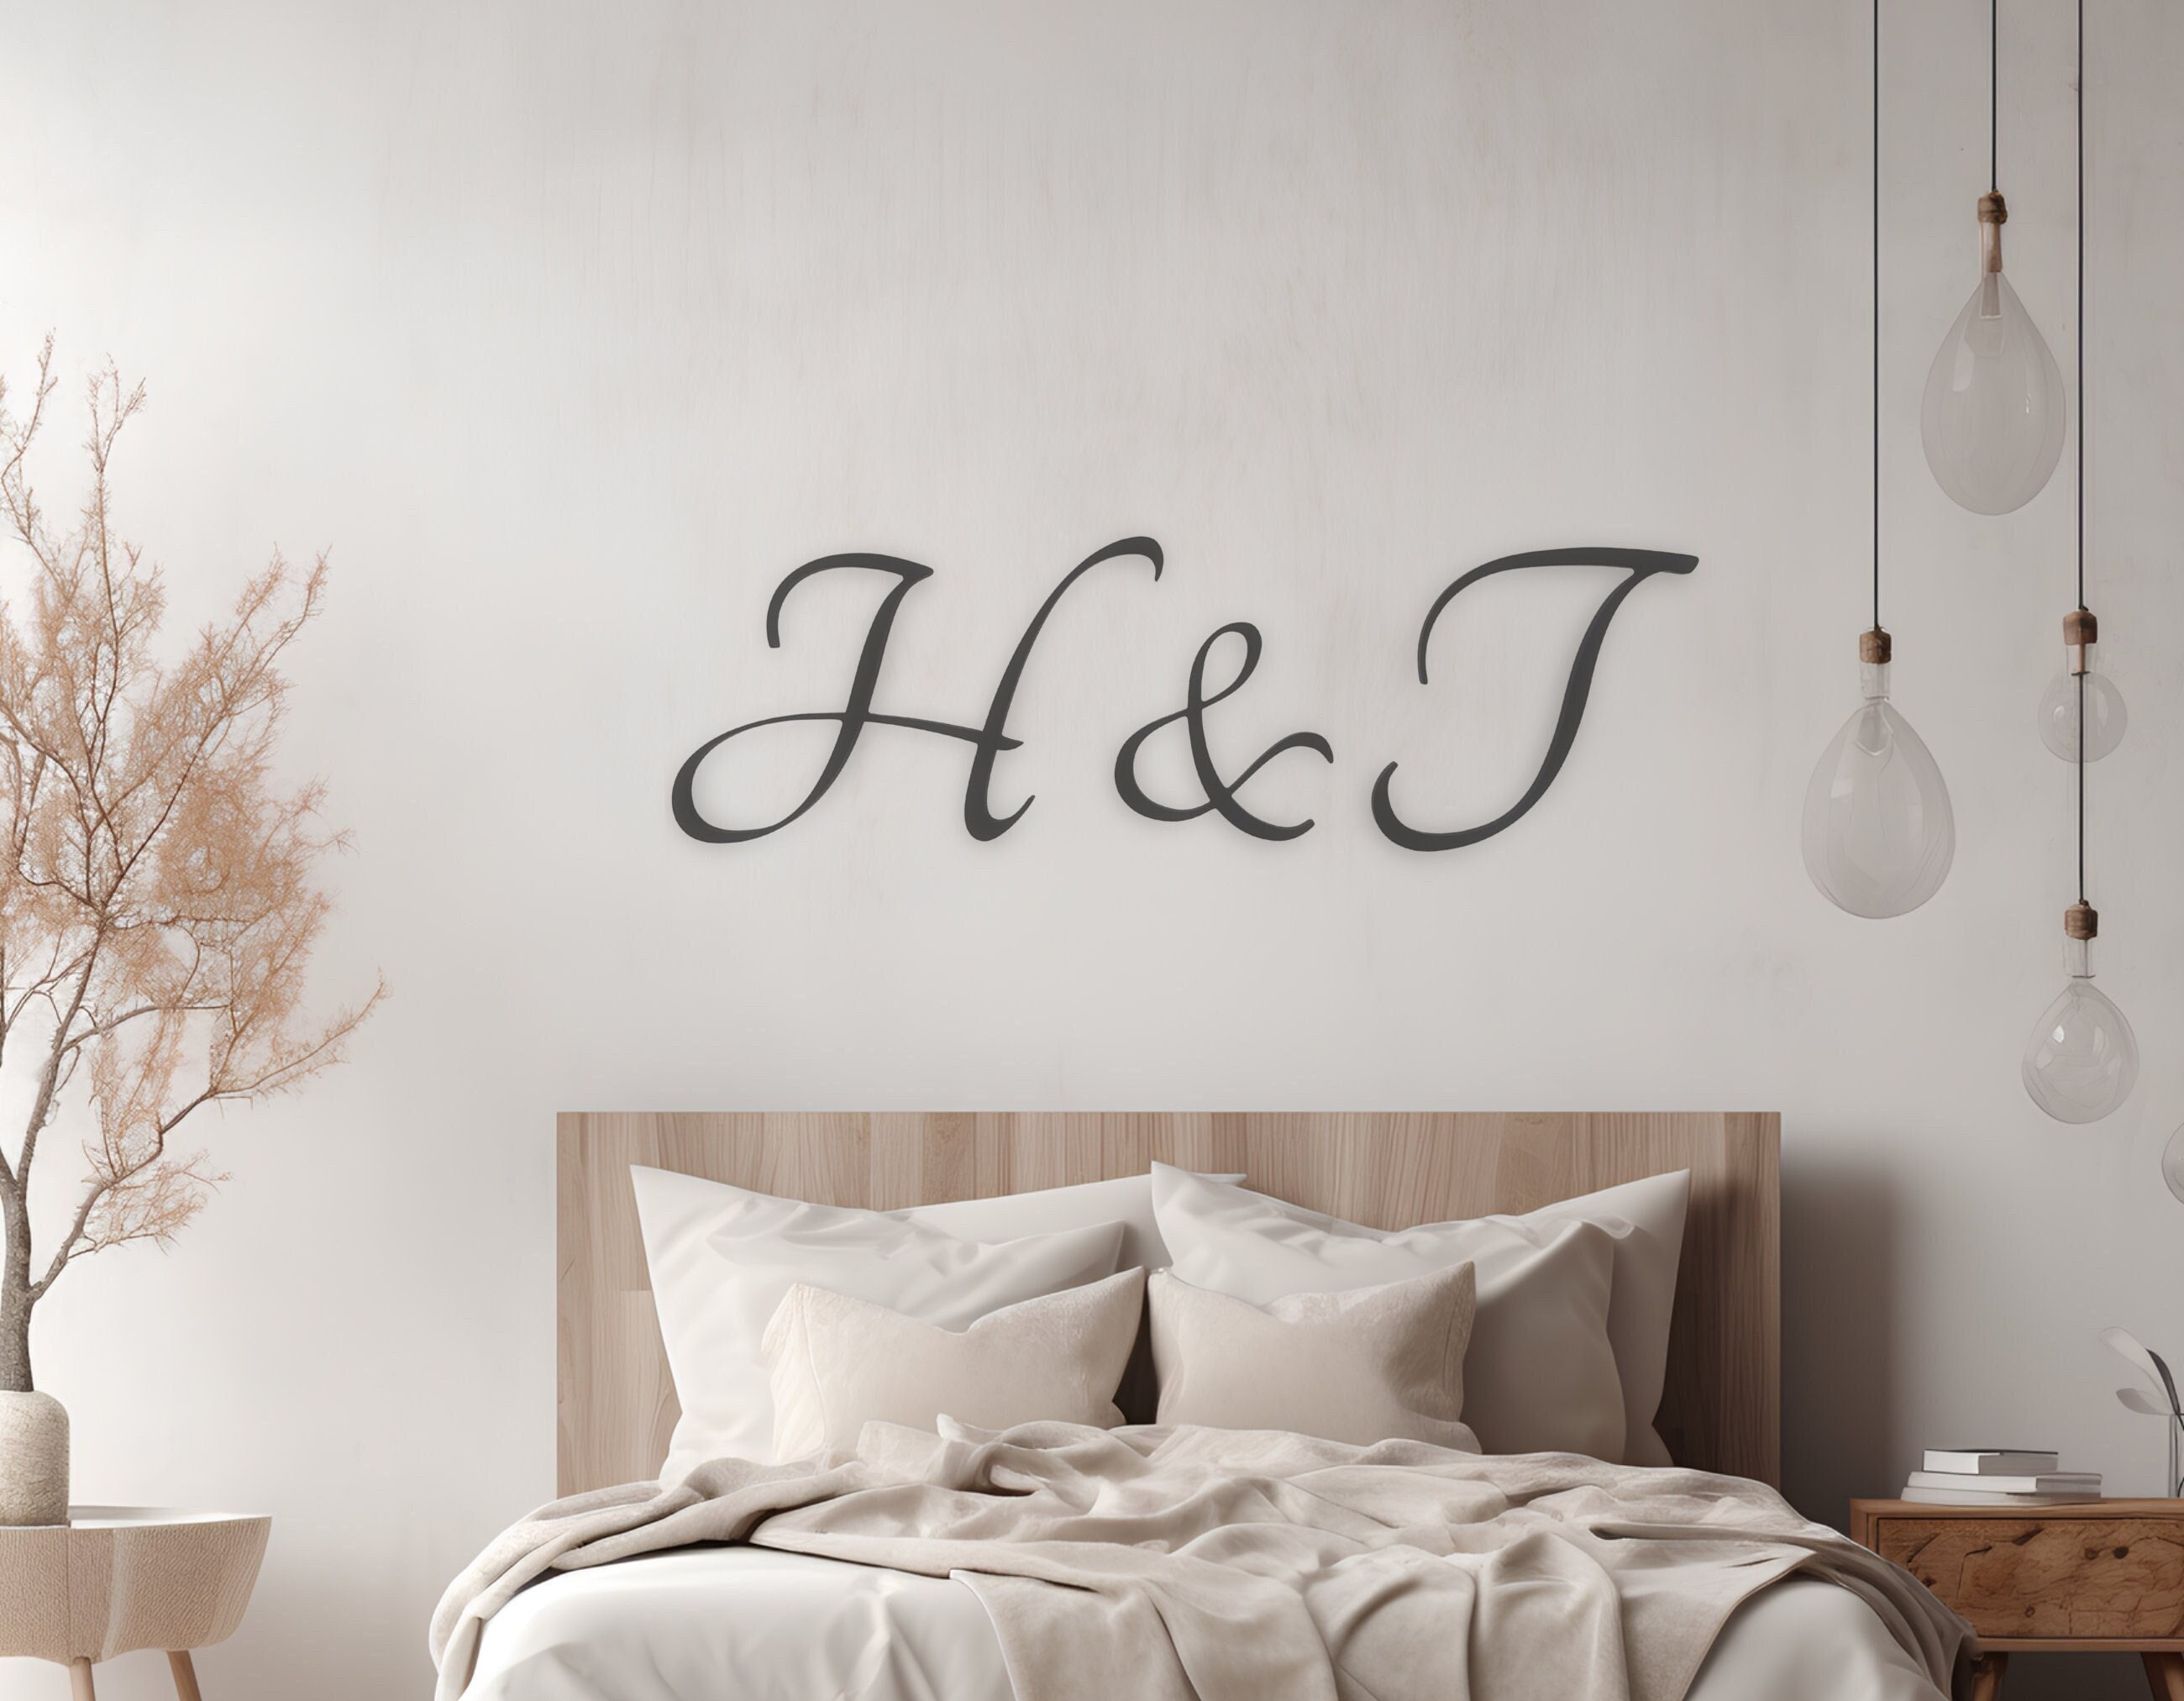 Large Name Wooden Letters for Wall Decor, Wood Modern Wall Letters